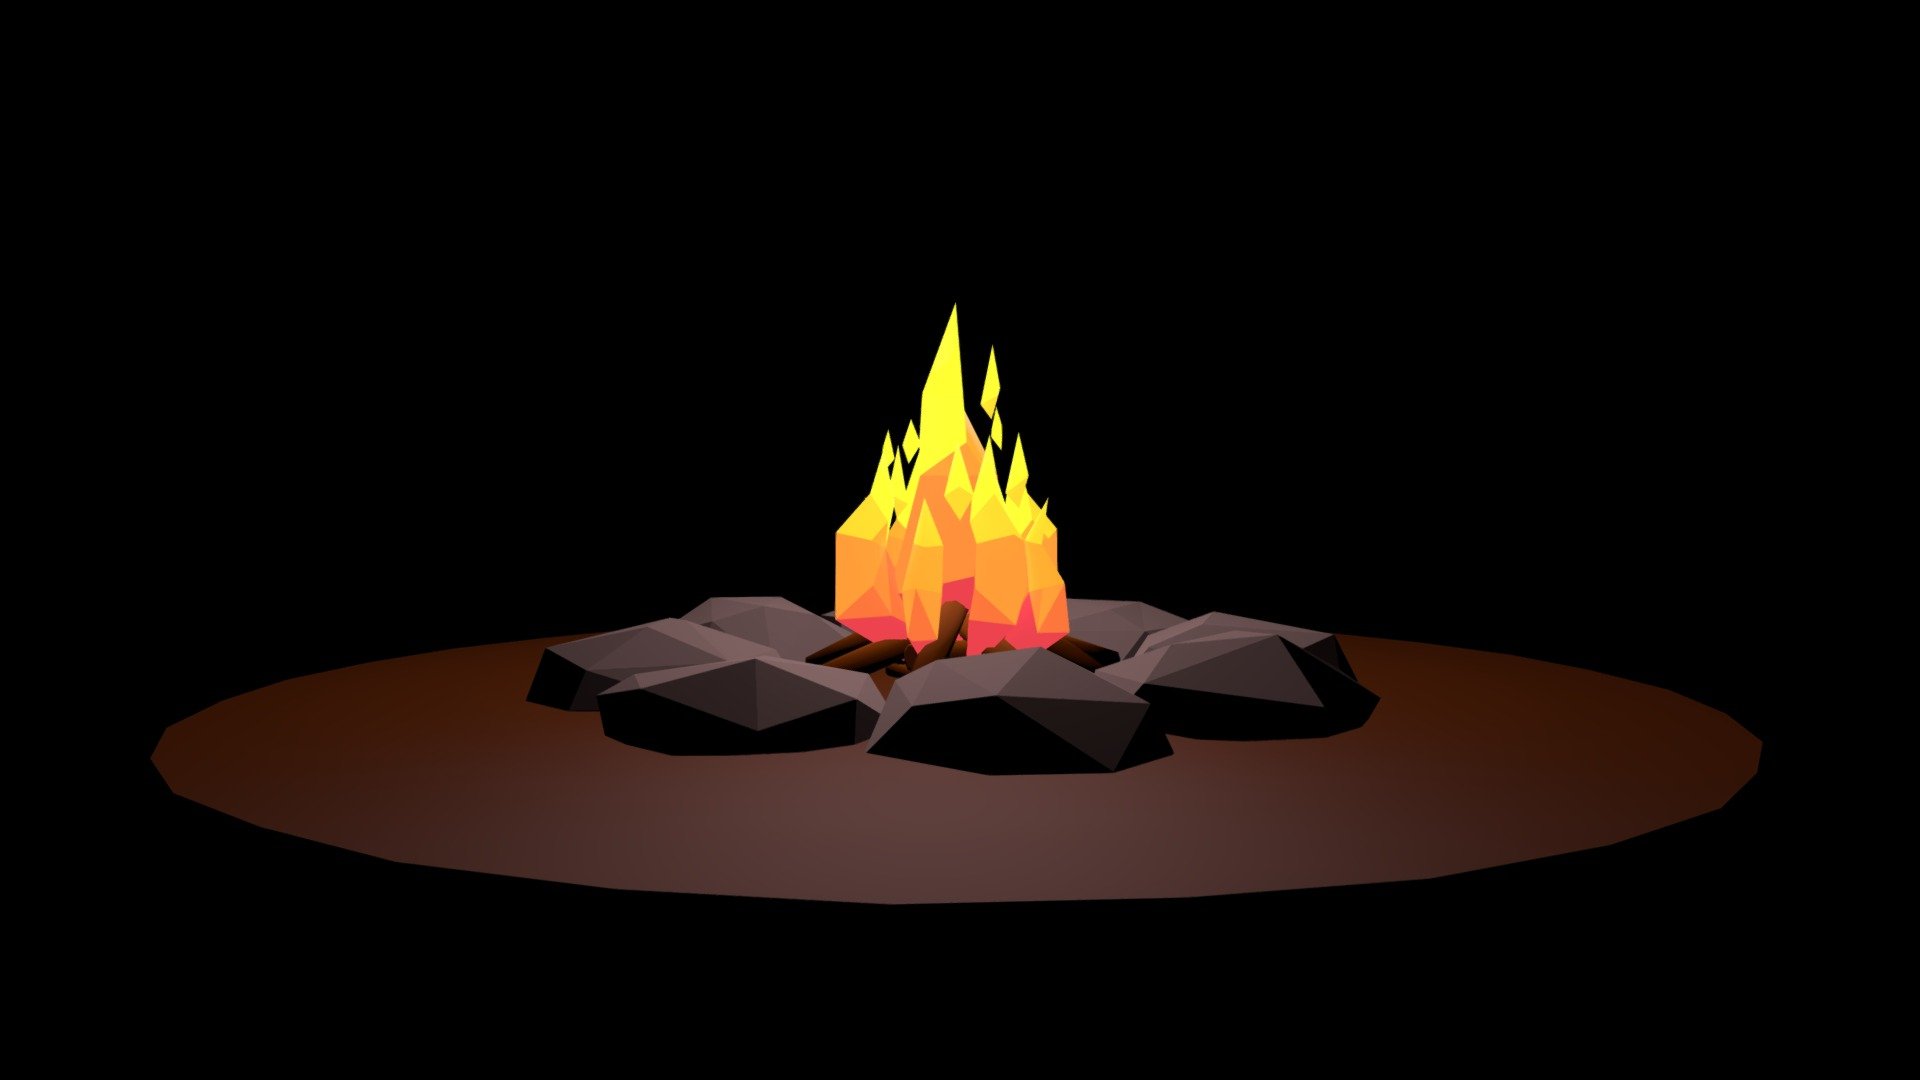 3D LowPoly Campfire created using Blender with Cycles.

You can use it on any 3D software and engine (Unity3D, Unreal Engine, …).

Available on my Gumroad's page: -link removed- - Low Poly Campfire - 3D model by Graffimiao 3d model